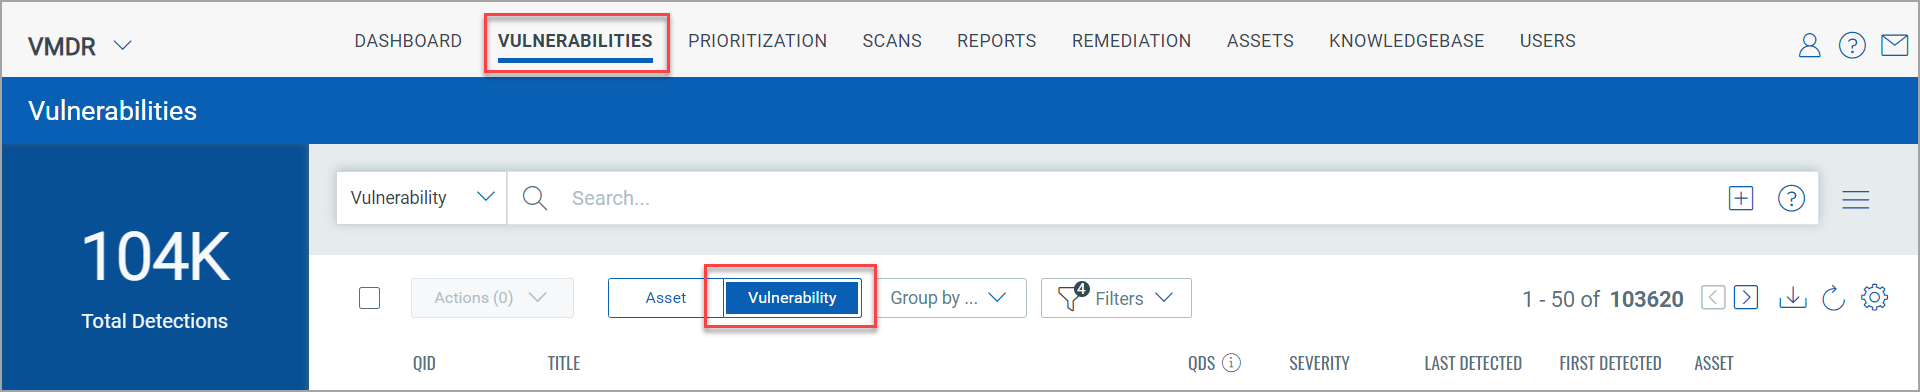 Choose Vulnerability to view the vulnerabilities detected on your assets.